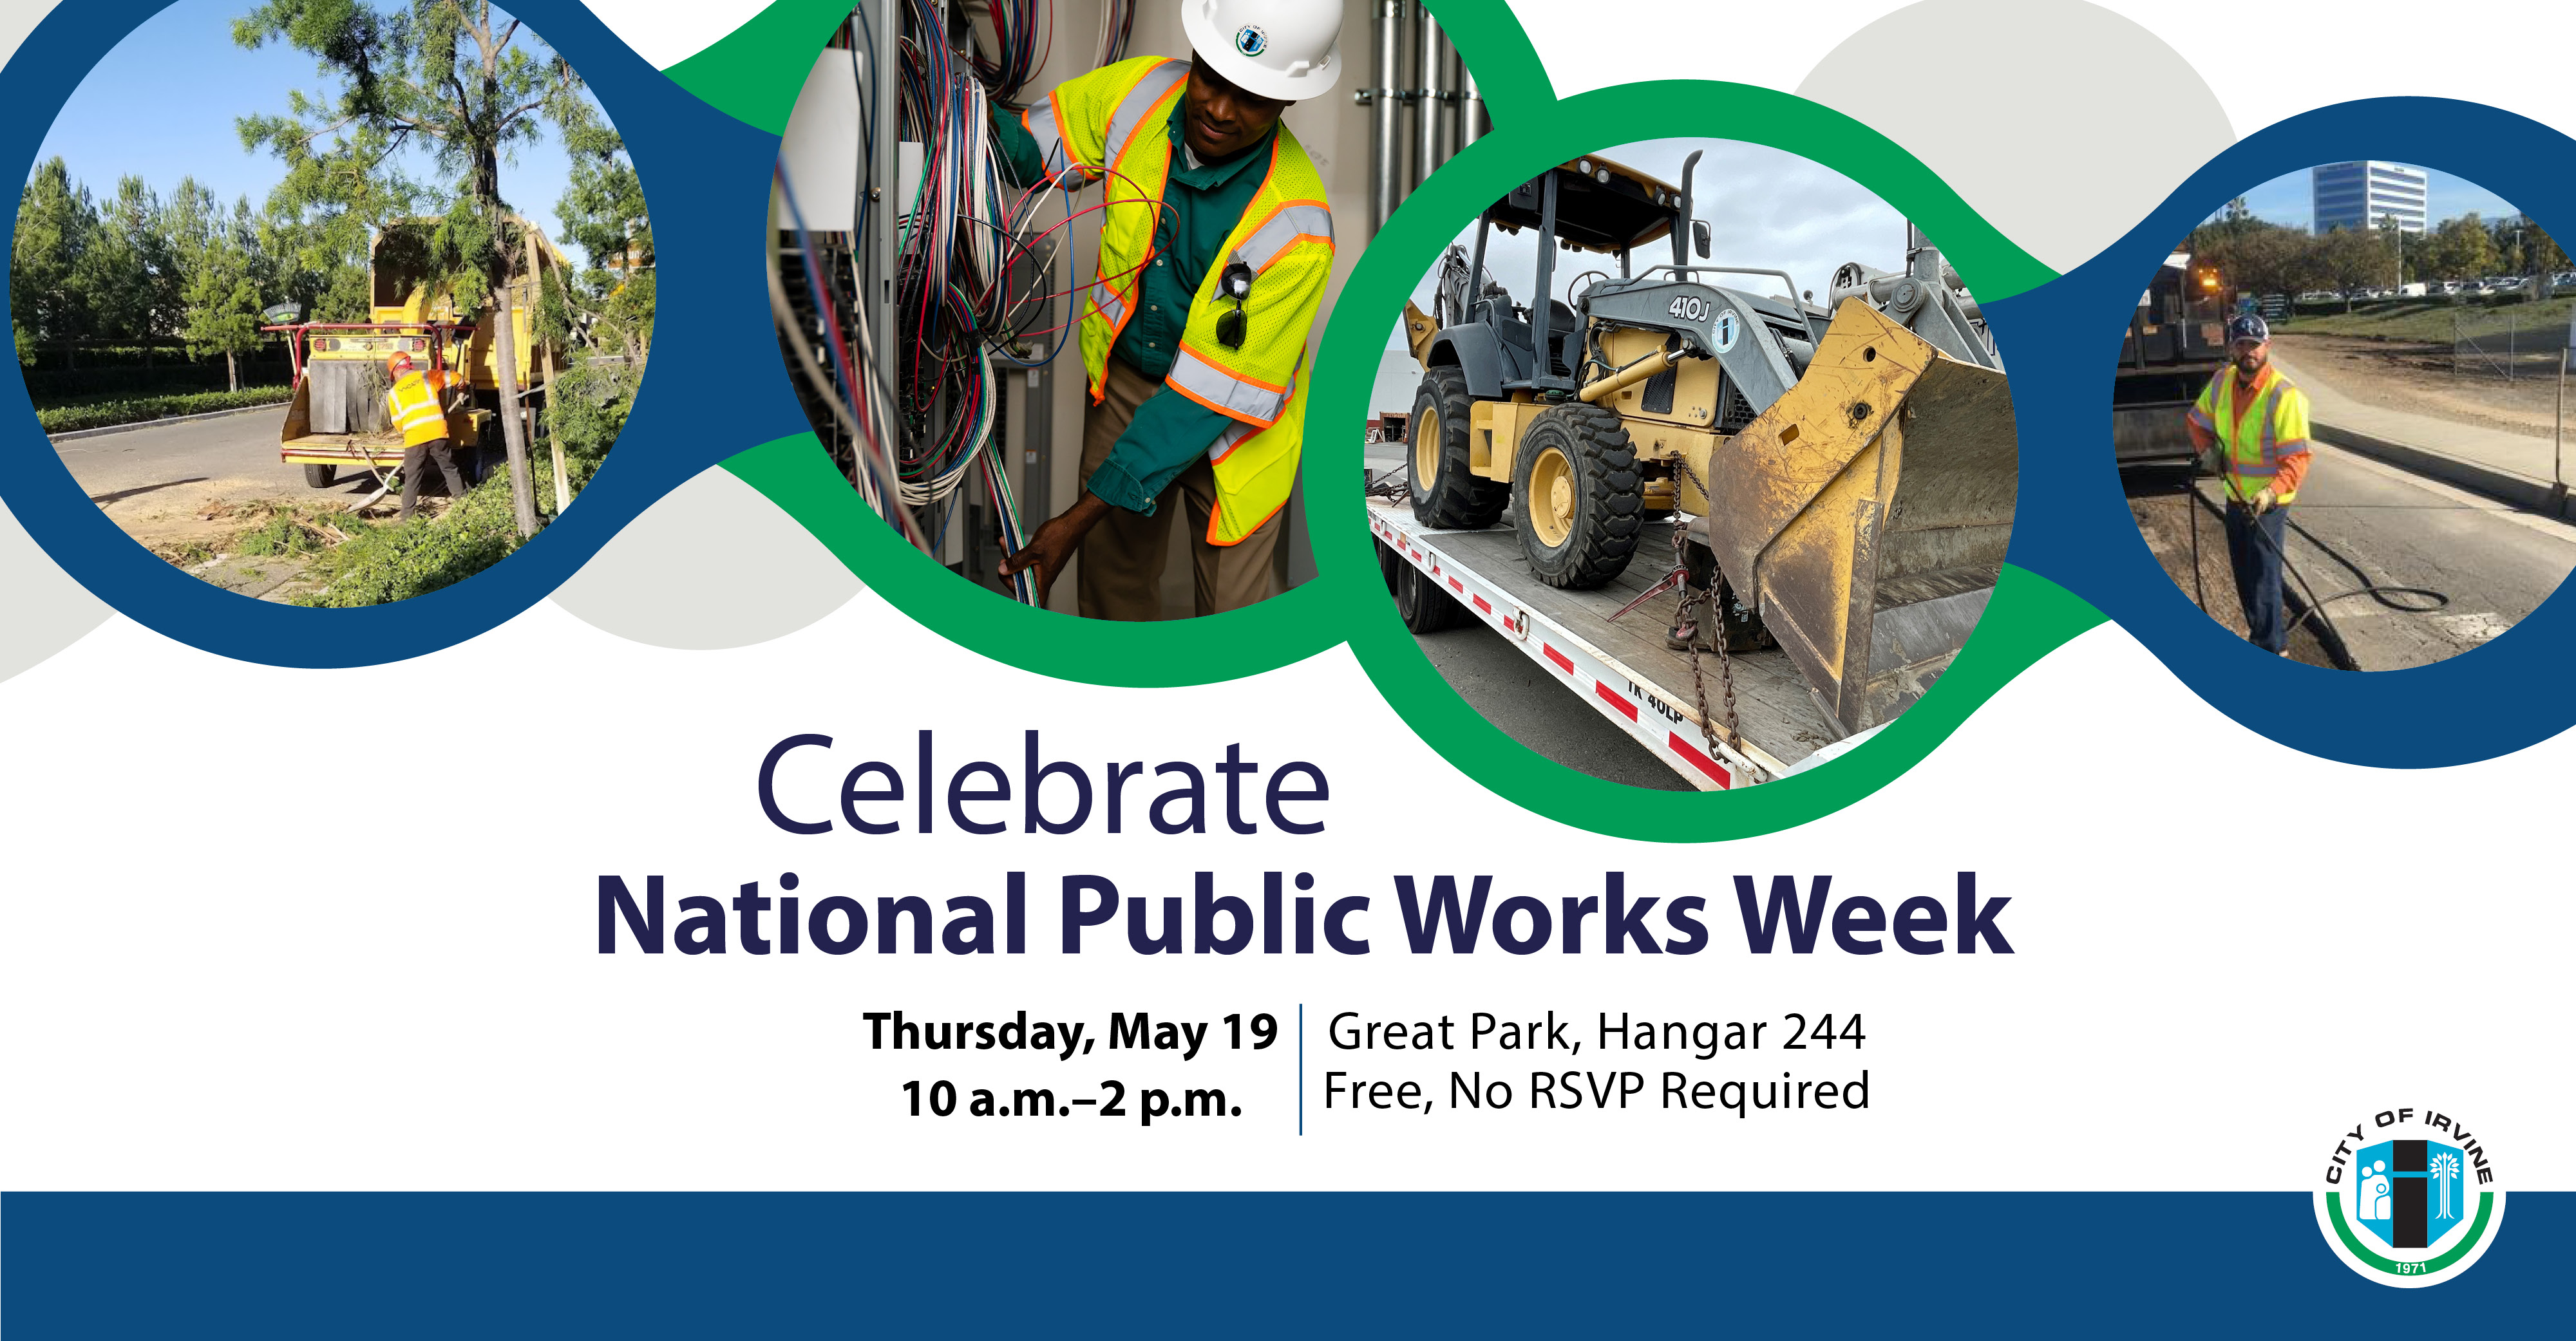 Celebrate National Public Works Week May 19 at Great Park City of Irvine